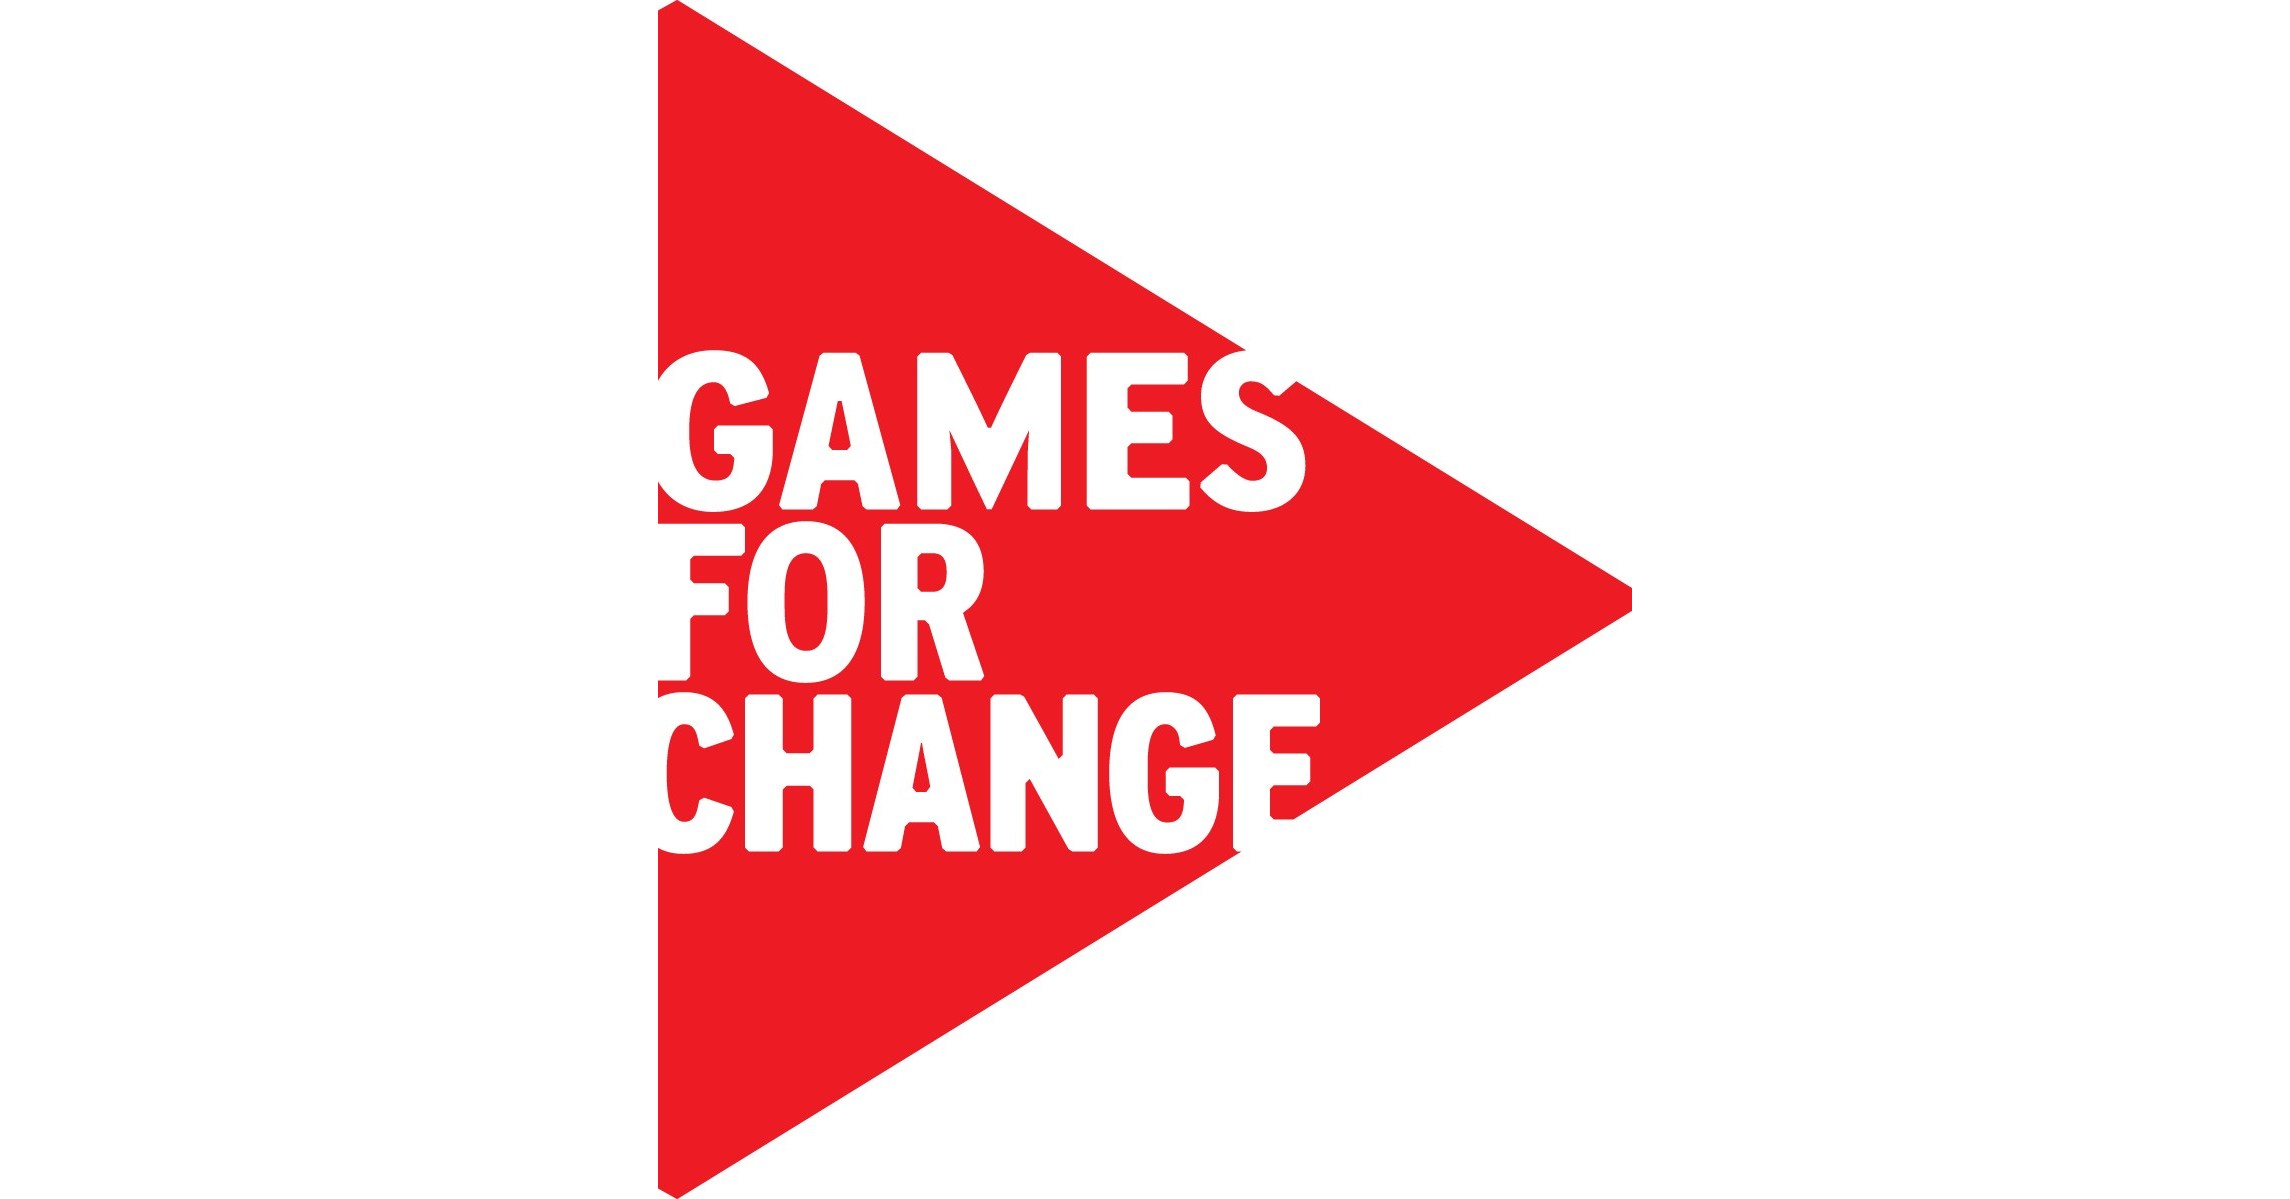 Games For Change Announces 10K Design Challenge Sponsored By AARP